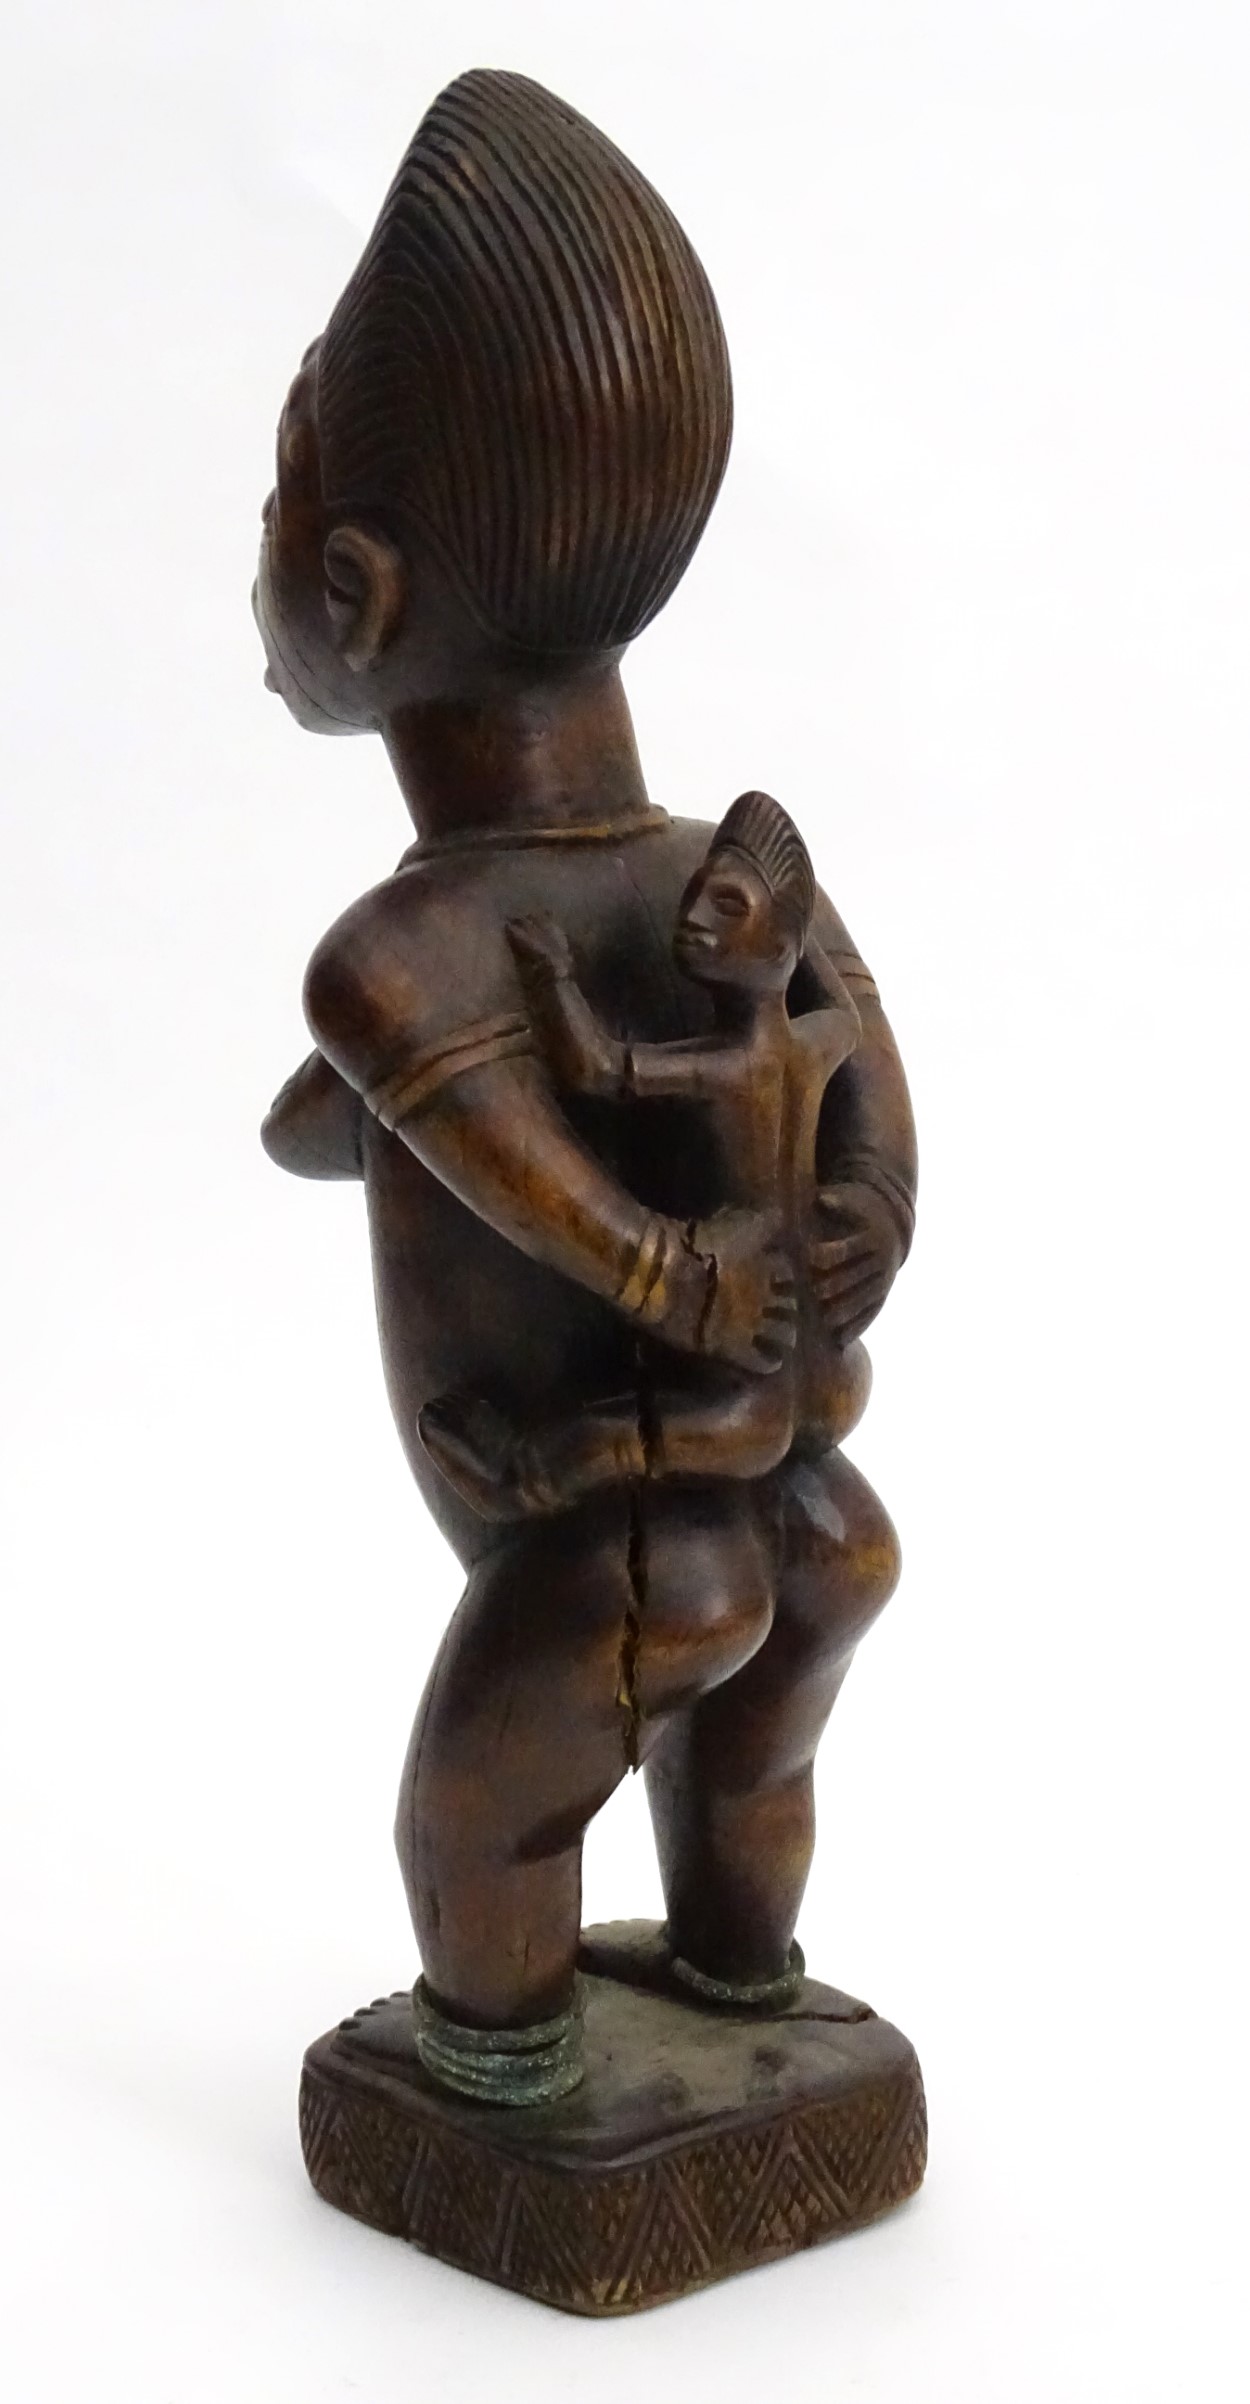 Tribal : An Ethnographic Native Tribal Kongo maternity figure. Approx. 18 1/2" high. - Image 8 of 11